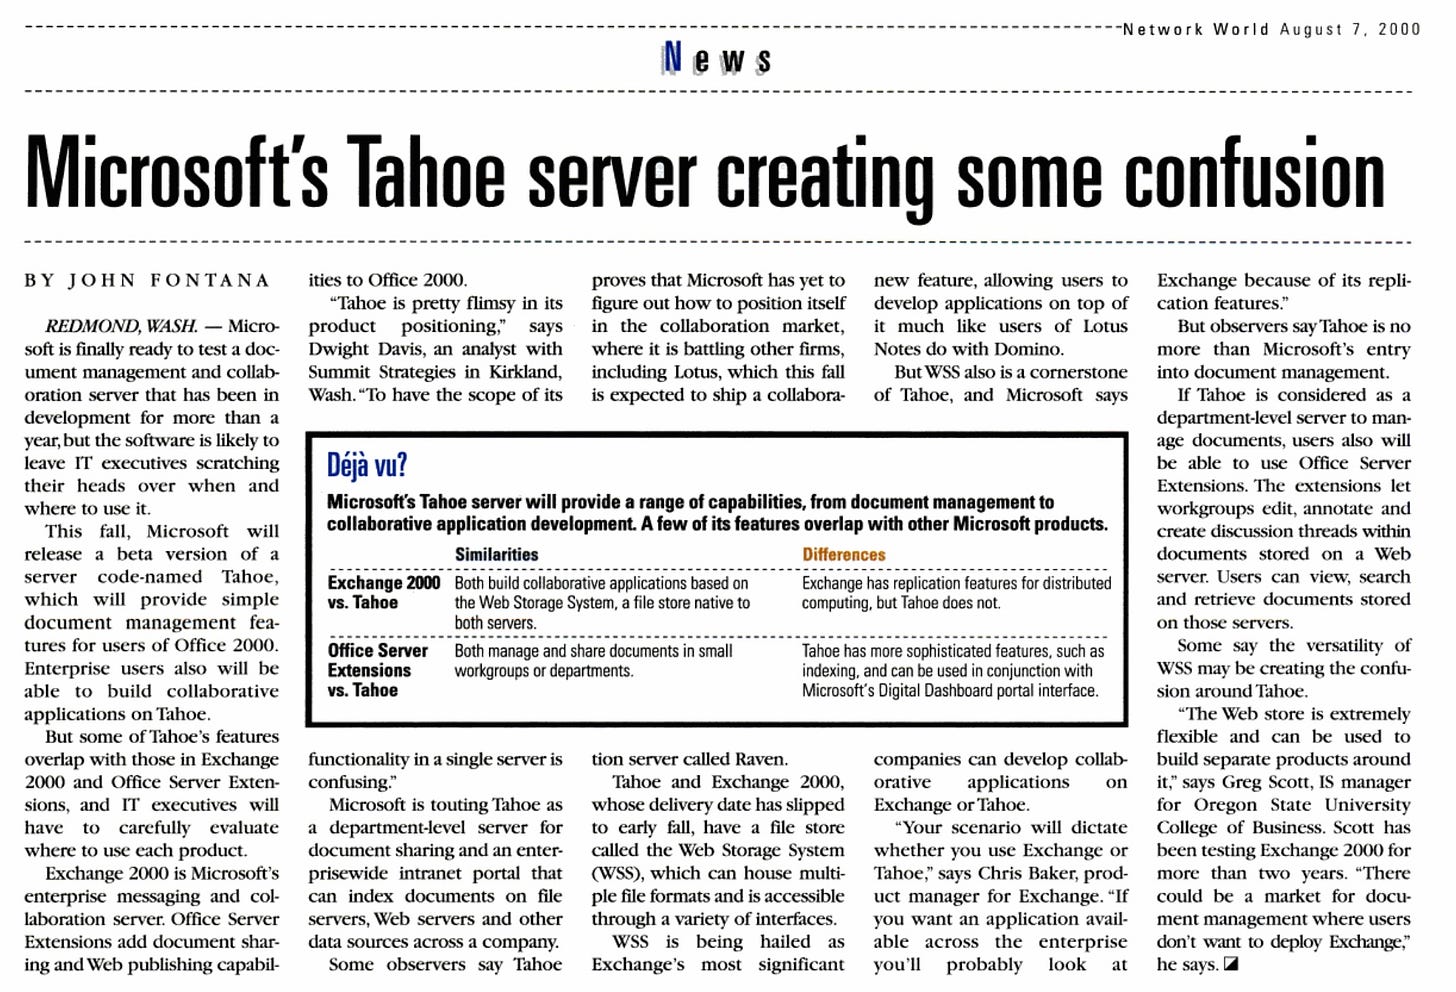 Microsoft's Tahoe server creating some confusion BY JOHN FONTANA REDMOND, WASH. - Micro- soft is finally ready to test a doc- ument management and collab- oration server that has been in ities to Office 2000. "Tahoe is pretty flimsy in its product positioning." says Dwight Davis, an analyst with Summit Strategies in Kirkland, Wash. "To have the scope of its proves that Microsoft has yet to new feature, allowing users to figure out how to position itself develop applications on top of in the collaboration market, it much like users of Lotus where it is battling other firms, Notes do with Domino. including Lotus, which this fall But WSS also is a cornerstone is expected to ship a collabora- of Tahoe, and Microsoft says Exchange because of its repli- cation features." But observers say Tahoe is no more than Microsoft's entry into document management. If Tahoe is considered as a development for more than a department-level server to man- year, but the software is likely to age documents, users also will leave IT executives scratching their heads over when and where to use it. This fall. Microsoft will release a beta version of a server code-named Tahoe, which will provide simple document management fea- Déjà vu? Microsoft's Tahoe server will provide a range of capabilities, from document management to collaborative application development. A few of its features overlap with other Microsoft products. Similarities Differences Exchange 2000 Both build collaborative applications based on vs. Tahoe the Web Storage System, a file store native to both servers. be able to use Office Server Extensions. The extensions let workgroups edit, annotate and create discussion threads within documents stored on a Web Exchange has replication features for distributed computing, but Tahoe does not. server. Users can view, search and retrieve documents stored on those servers. tures for users of Office 2000. Enterprise users also will be able to build collaborative Office Server Extensions vs. Tahoe Both manage and share documents in small workgroups or departments. Tahoe has more sophisticated features, such as indexing, and can be used in conjunction with Microsoft's Digital Dashboard portal interface. Some say the versatility of WSS may be creating the confu- sion around Tahoe. applications on Tahoe. "The Web store is extremely But some of Tahoe's features flexible and can be used to overlap with those in Exchange functionality in a single server is tion server called Raven. companies can develop collab- build separate products around 2000 and Office Server Exten- confusing." Tahoe and Exchange 2000, orative applications on it" says Greg Scott, IS manager sions, and IT executives will Microsoft is touting Tahoe as whose delivery date has slipped Exchange or Tahoe. for Oregon State University have to carcfully evaluate a department-level server for to early fall, have a file store "Your scenario will dictate College of Business. Scott has where to use each product. document sharing and an enter- called the Web Storage System whether you use Exchange or been testing Exchange 2000 for Exchange 2000 is Microsoft's prisewide intranet Dortal that (WSS), which can house multi- Tahoe." savs Chris Baker, prod- more than two vears. "There enterprise messaging and col- can index documents on file ple file formats and is accessible uct manager for Exchange. "If could be a market for docu- laboration server. Office Server servers. Web servers and other through a variety of interfaces. you want an application avail- ment management where users Extensions add document shar. data sources across a company. WSS is being hailed as able across the enterprise don't want to deploy Exchange," ing and Web publishing capabil Some observers say Tahoe Exchange's most significant you'll probably look at he says.